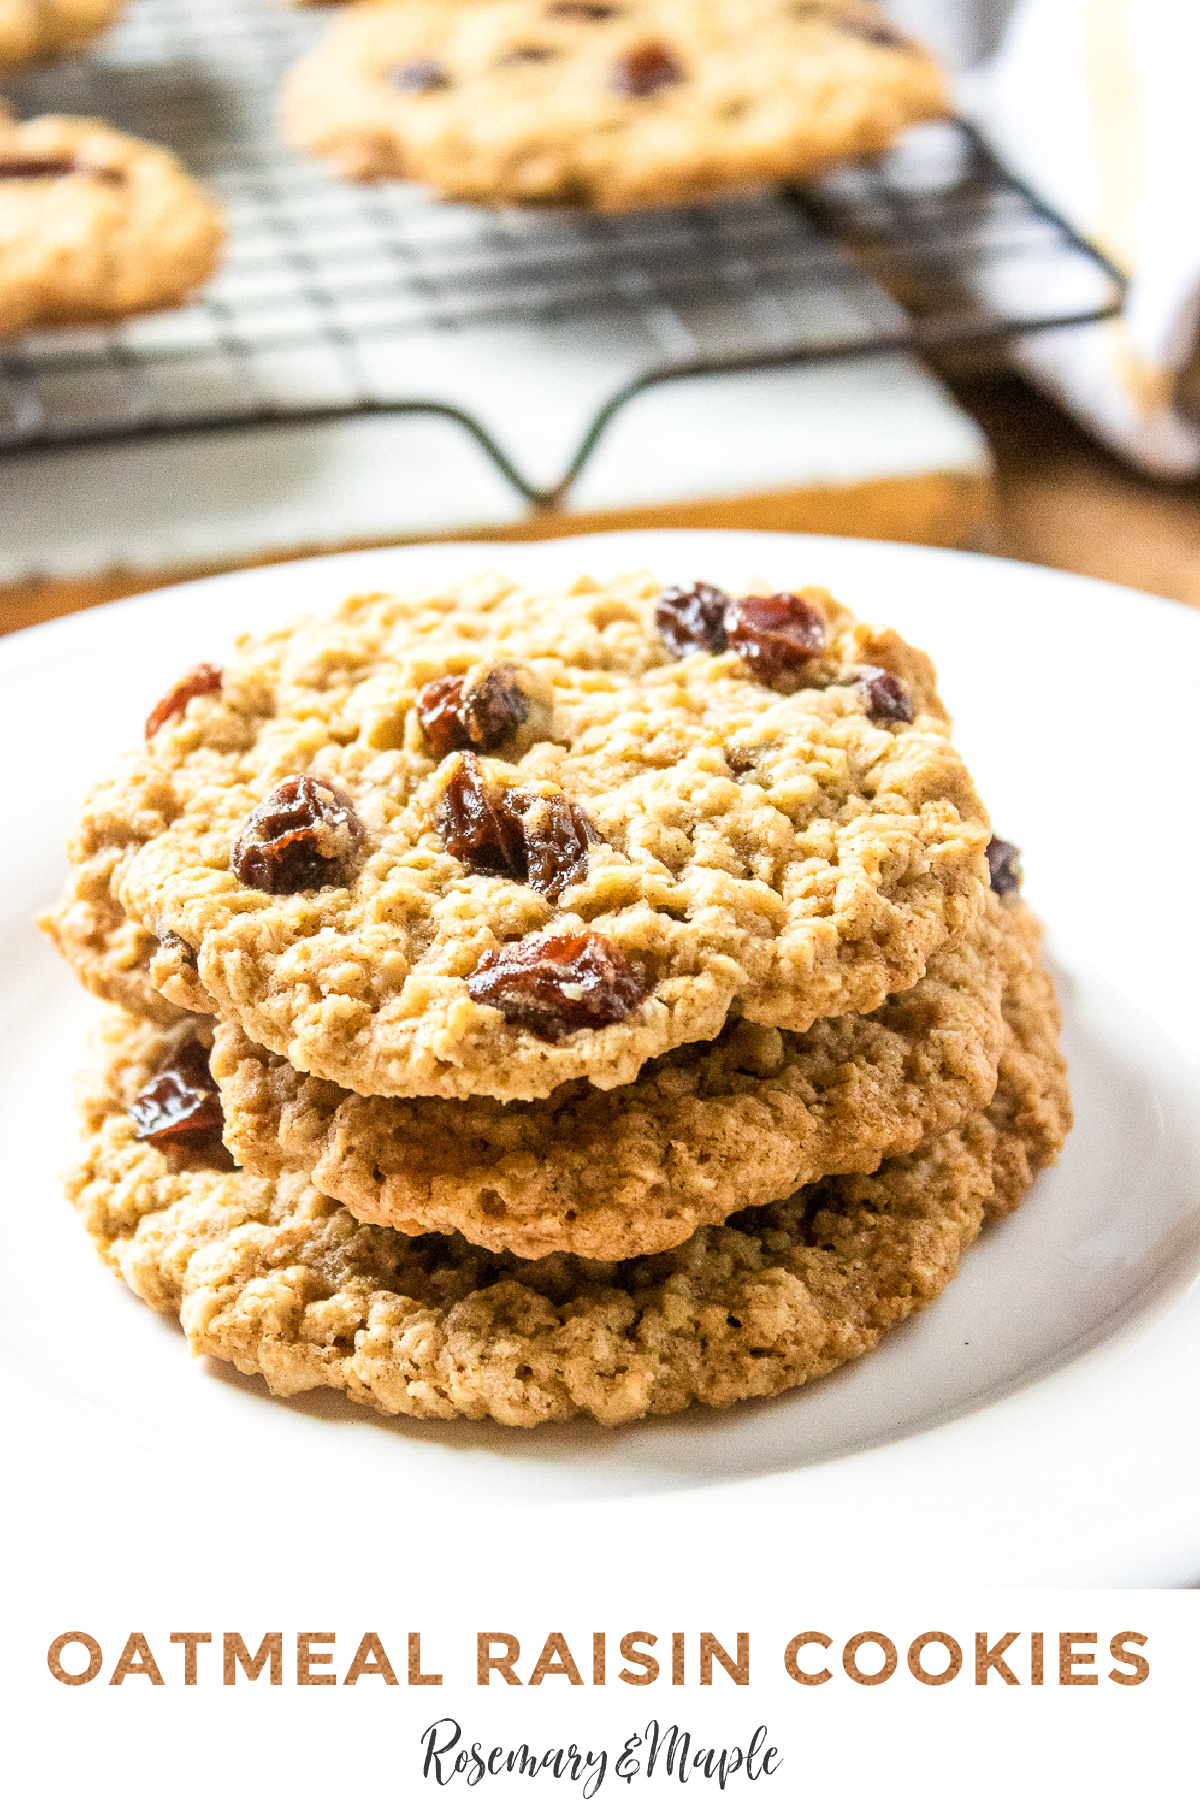 Looking for a delicious oatmeal raisin cookies recipe? Soft, chewy, and delicious oatmeal raisin cookies that are easy to make and delicious!